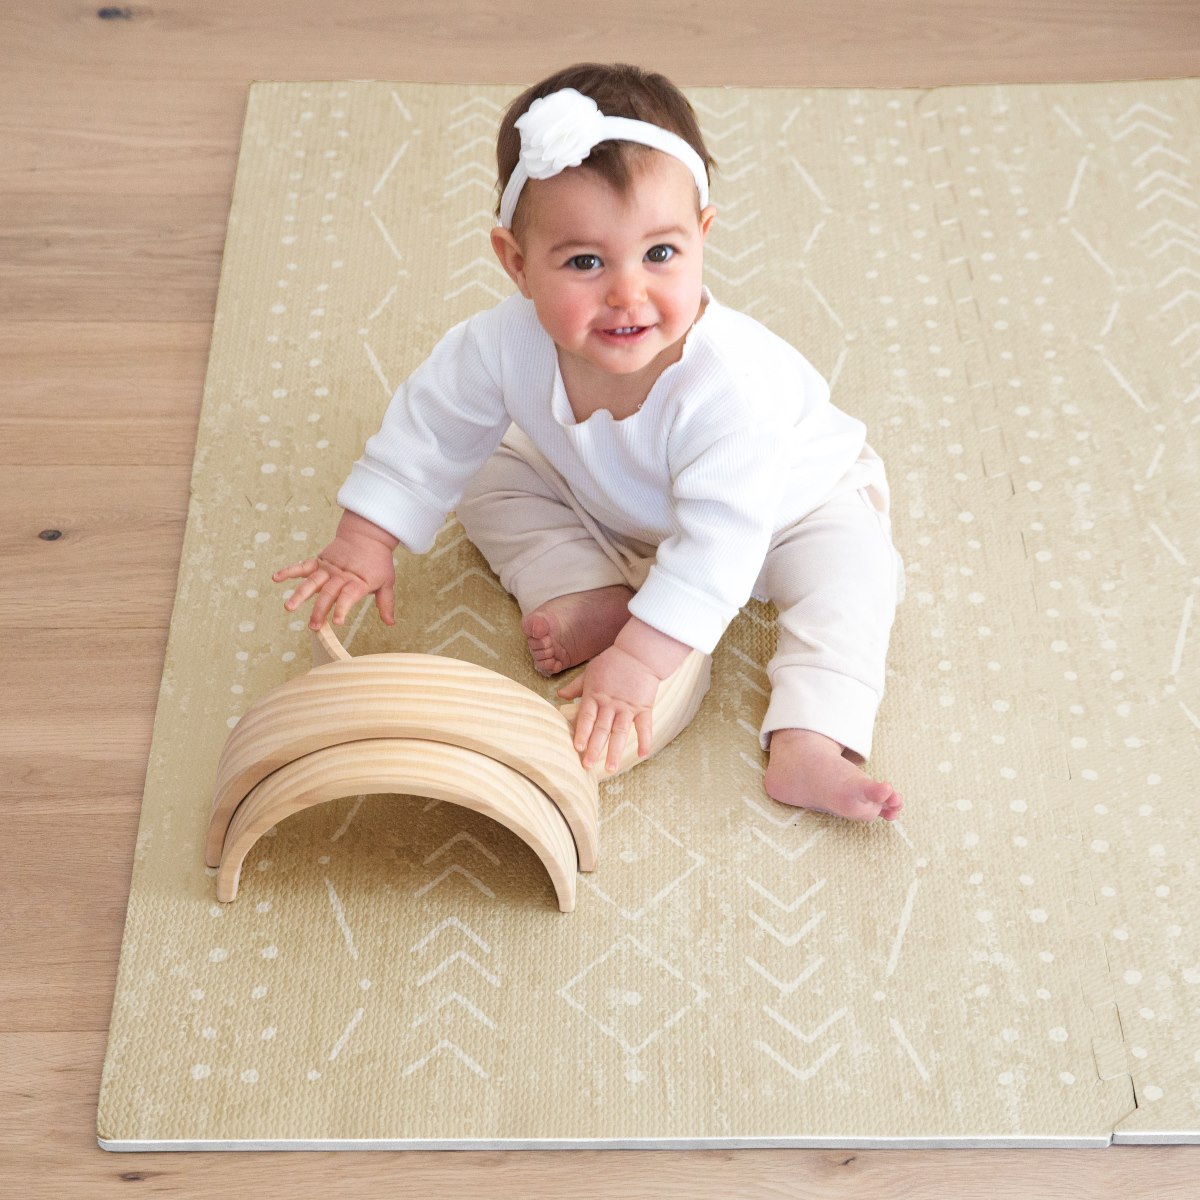 Lillefolk Stylish Foam Play Mat for Baby Thick Gray Soft Covers 6 ft x 4 ft Non-Toxic Playmat Interlocking Puzzle Tiles for Tummy Time and Crawling